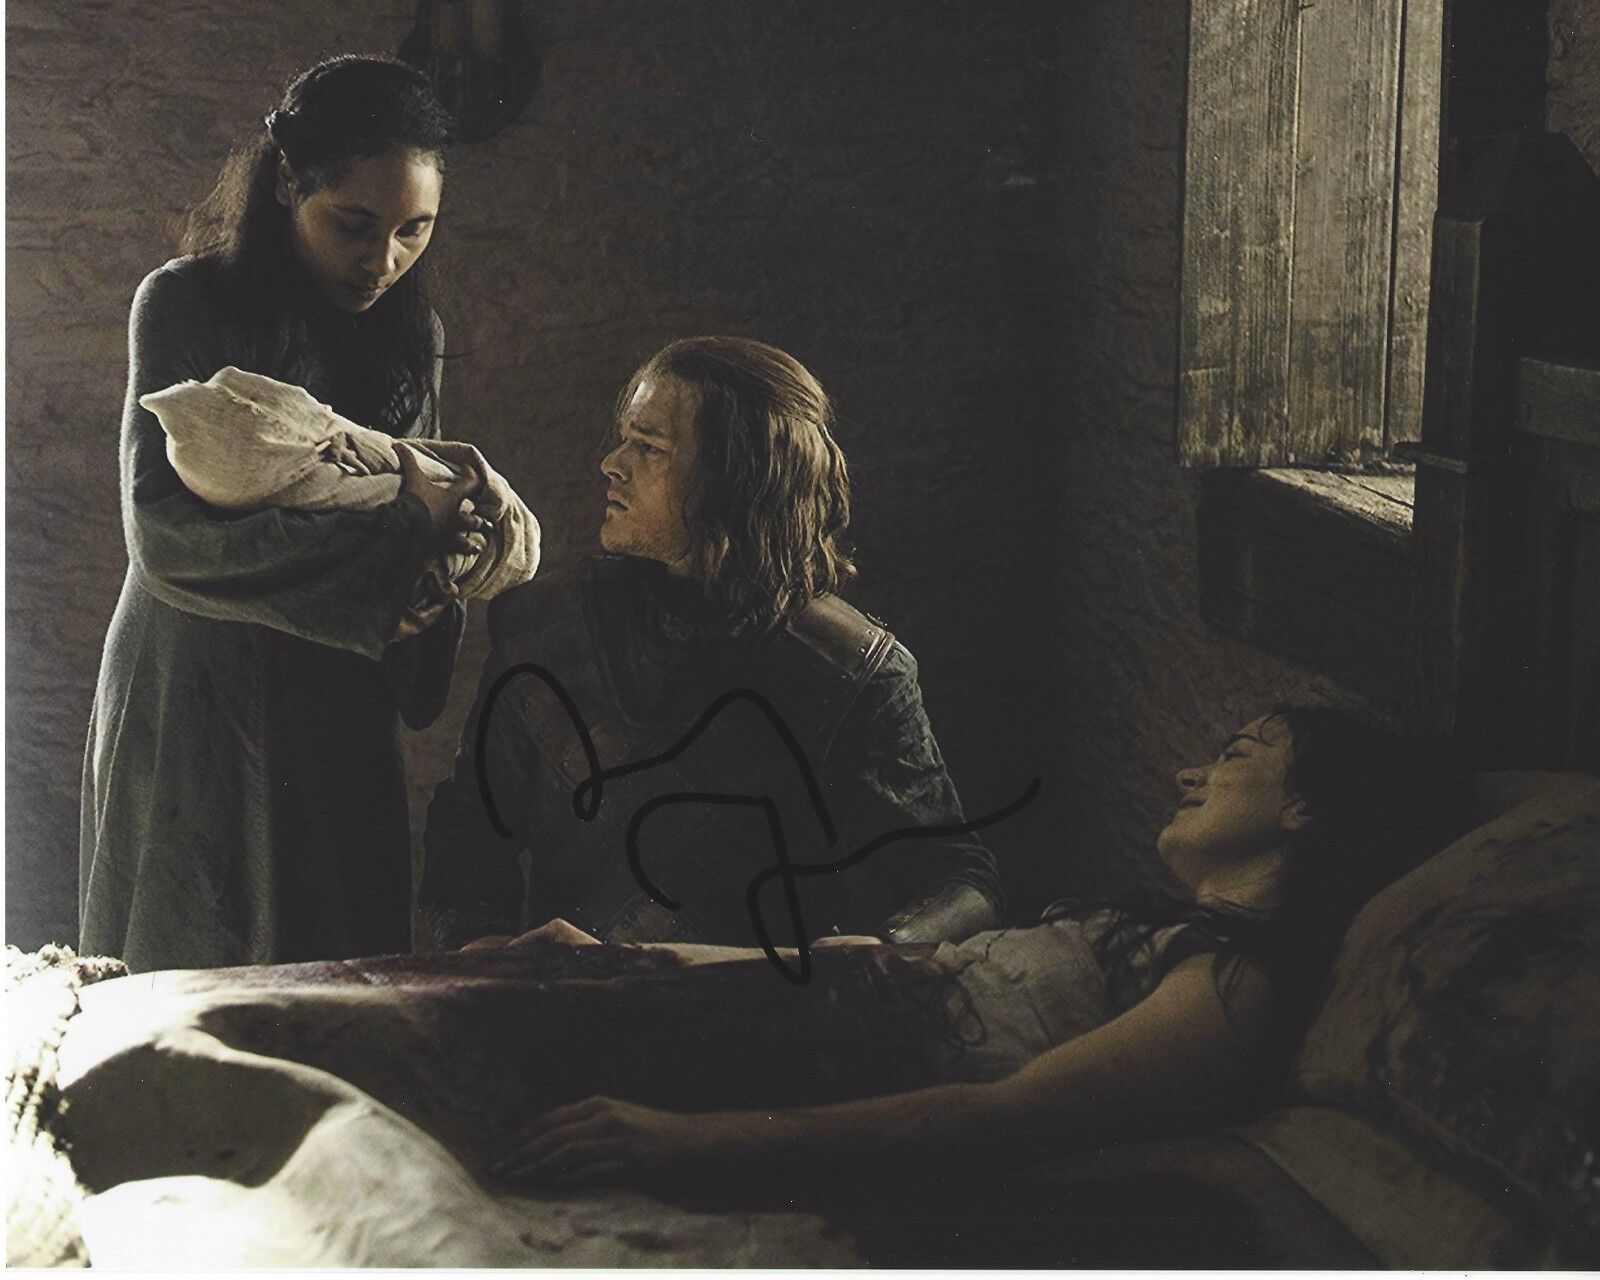 ACTRESS AISLING FRANCIOSI SIGNED 8x10 Photo Poster painting w/COA GAME OF THRONES LYANNA STARK